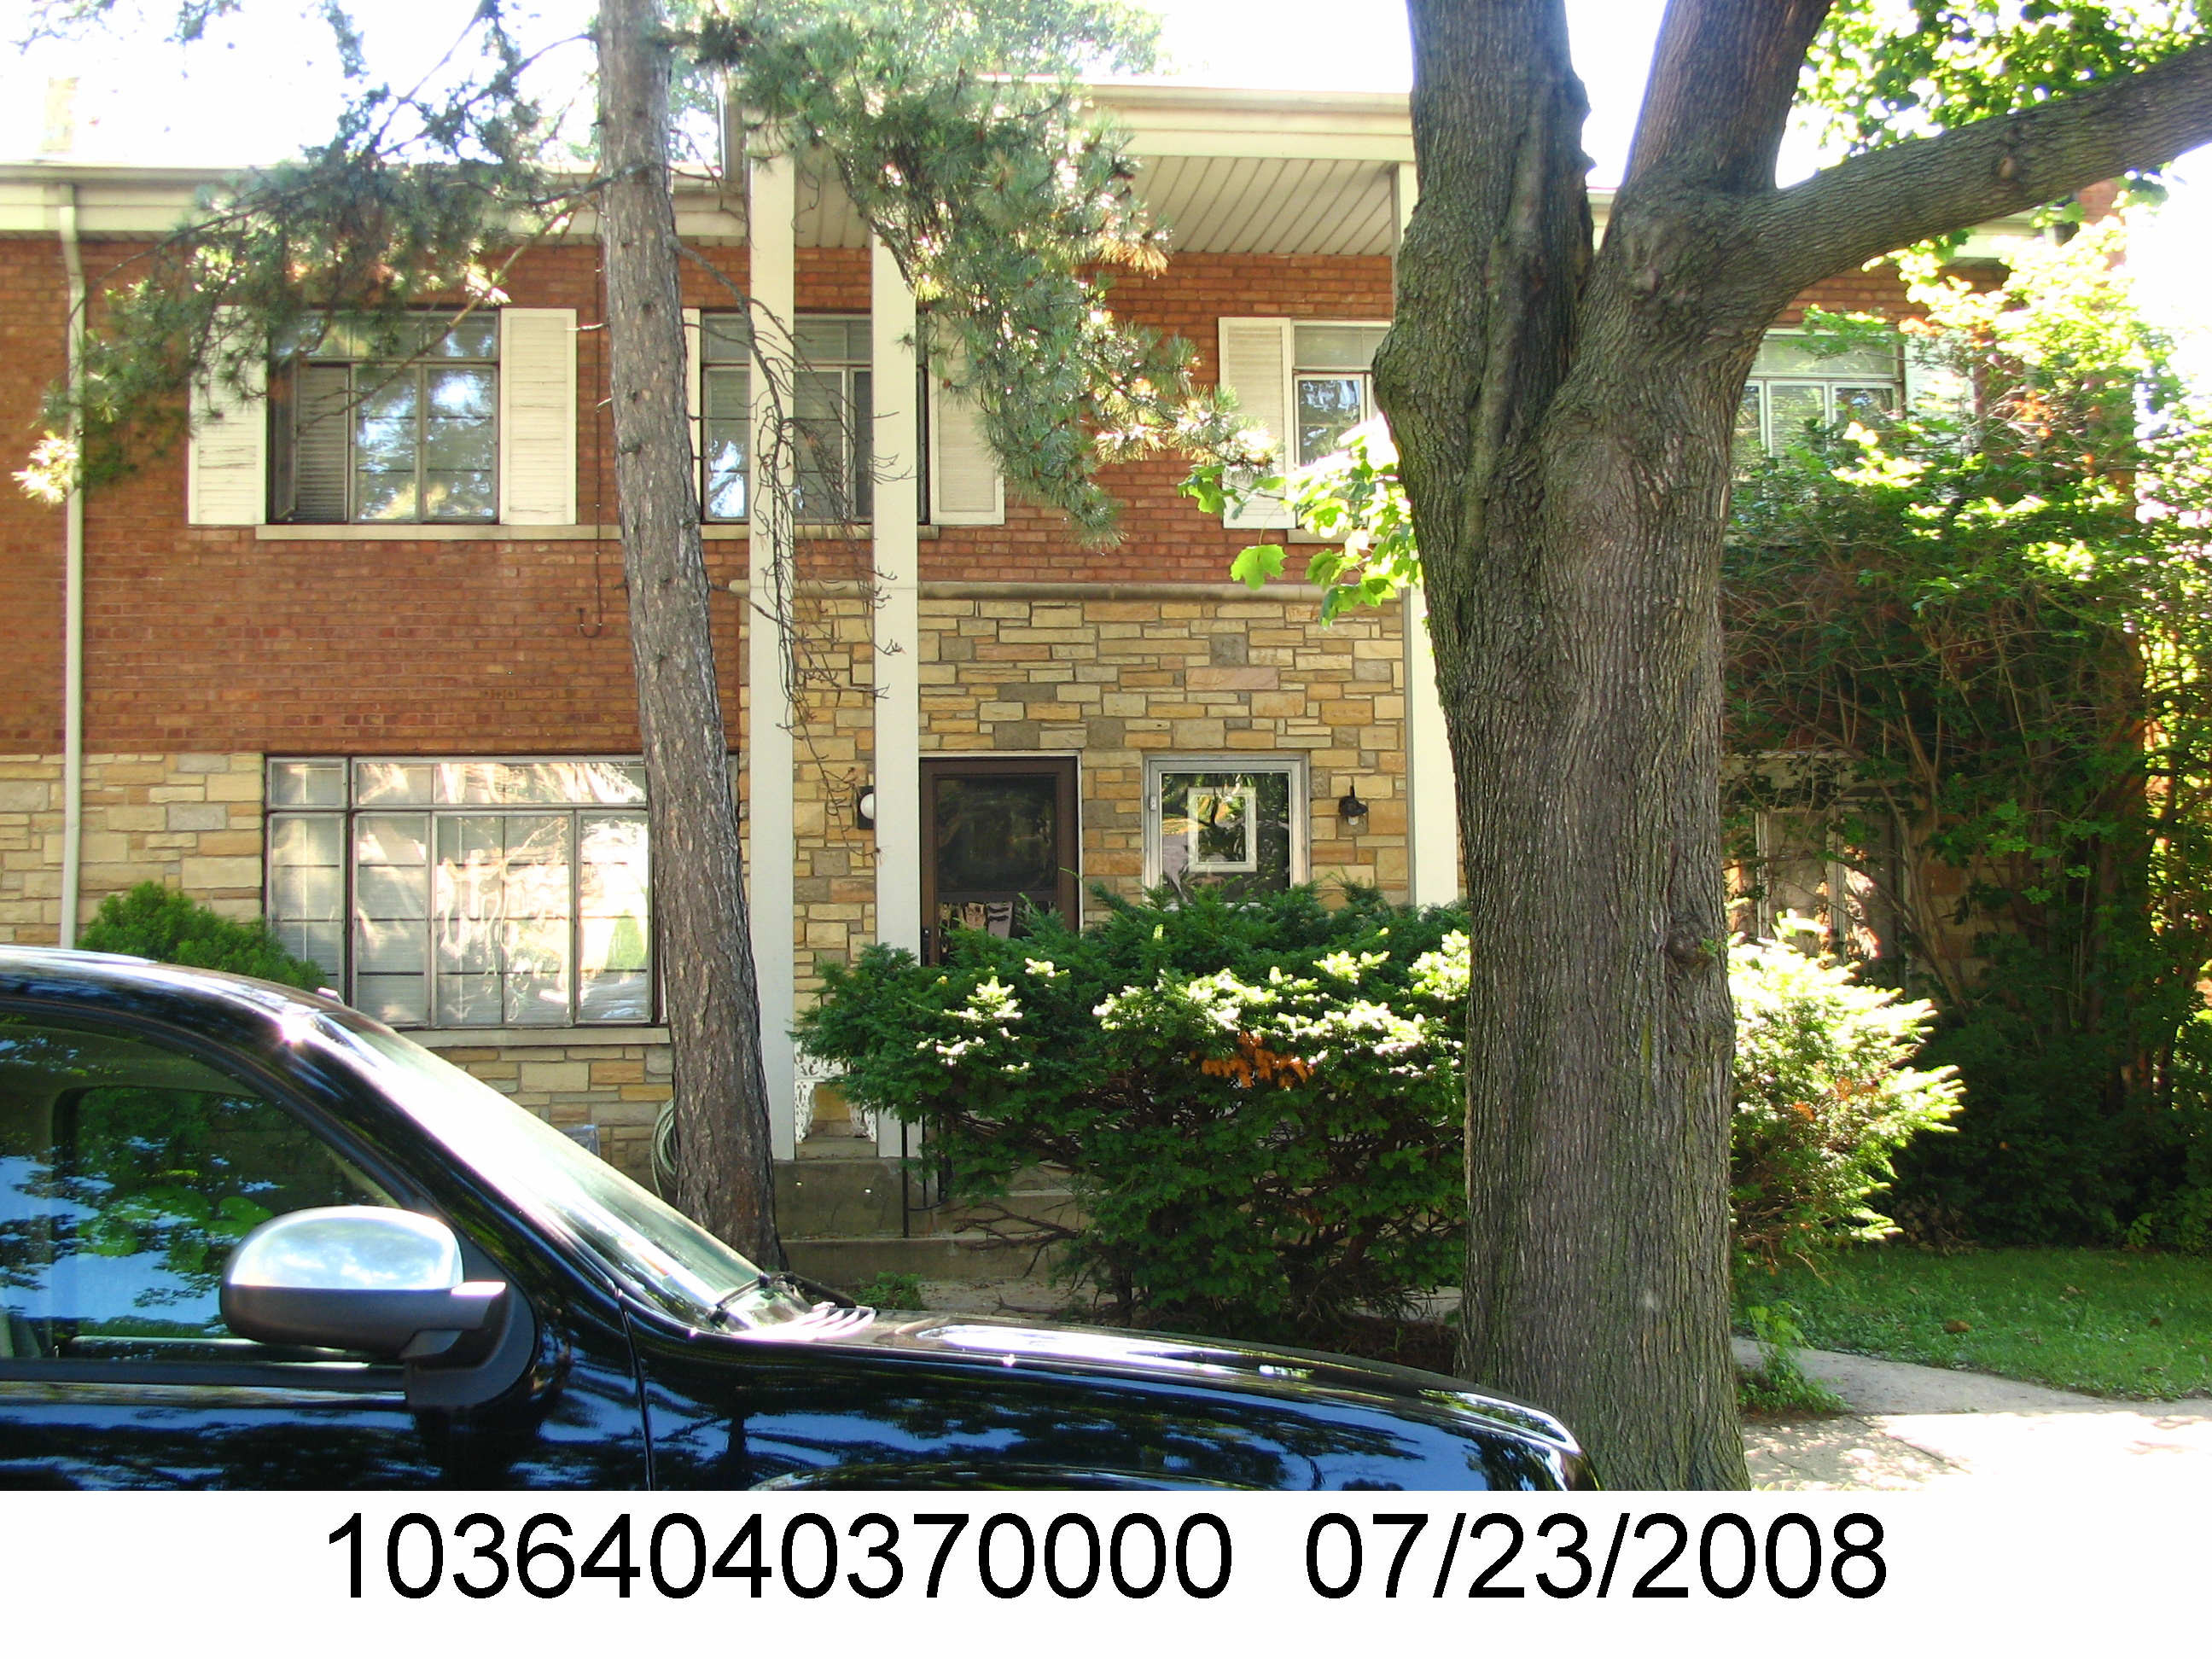 6749 N ROCKWELL ST, CHICAGO, IL 60645 | Single family | ILFLS